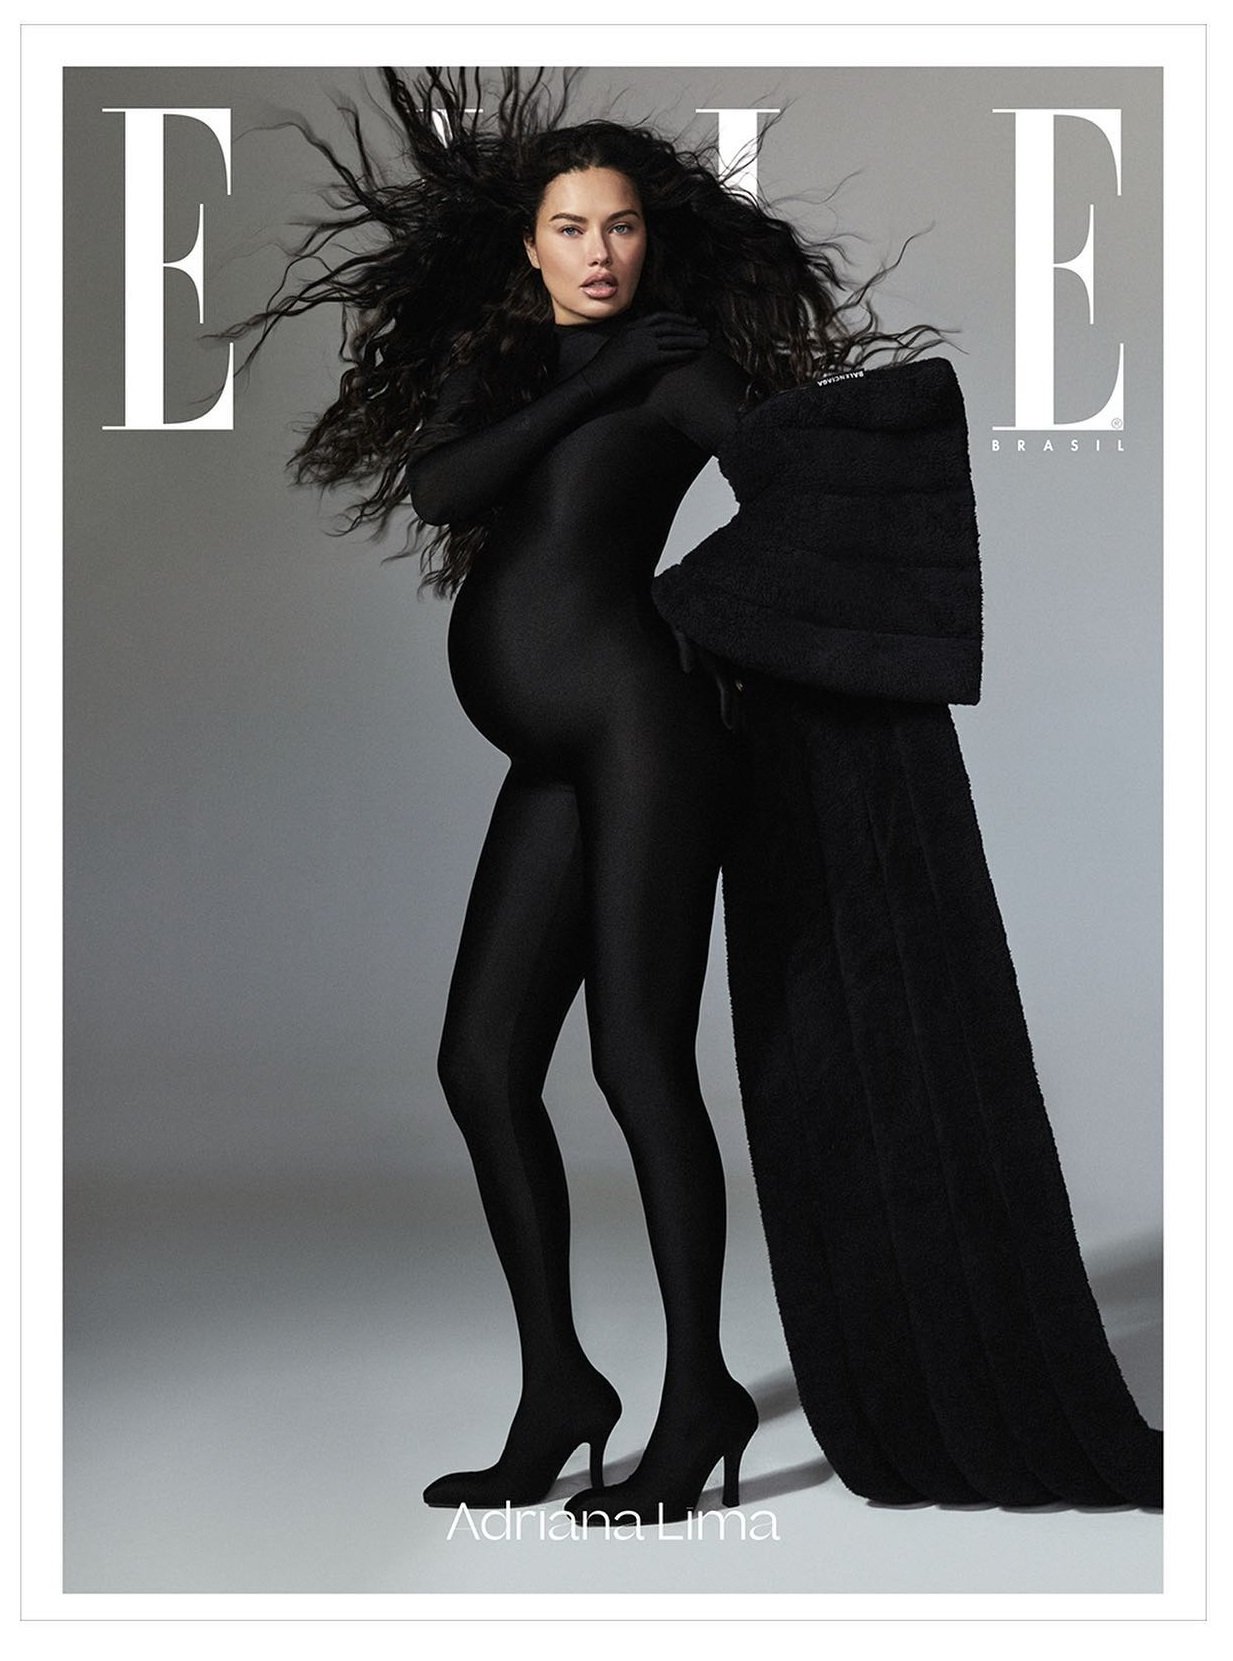 Adriana Lima Covers ELLE Brazil with Pregnant Mama IG Nod to @badgalriri —  Anne of Carversville